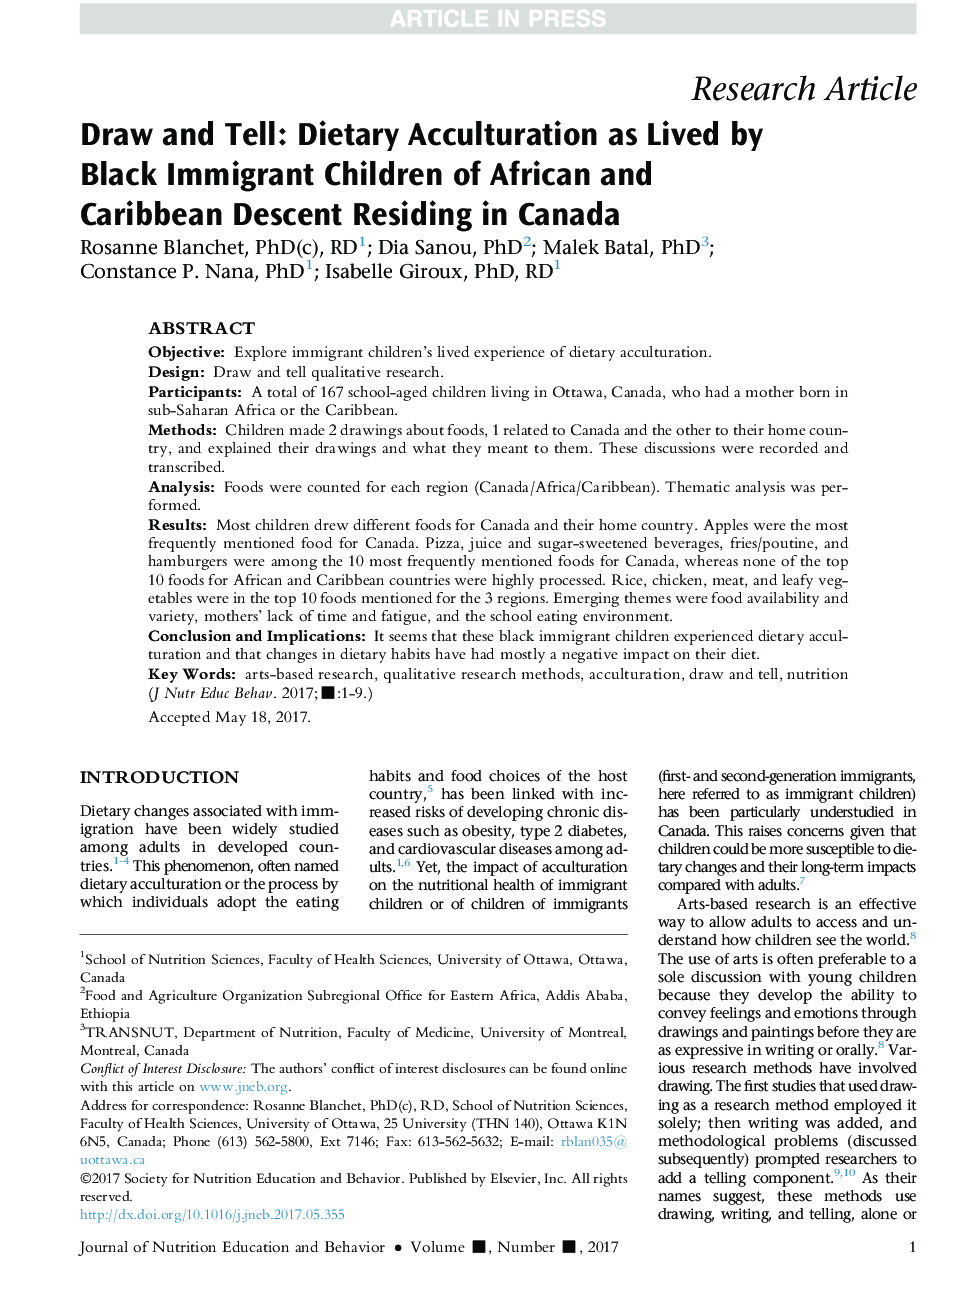 Draw and Tell: Dietary Acculturation as Lived by Black Immigrant Children of African and Caribbean Descent Residing in Canada